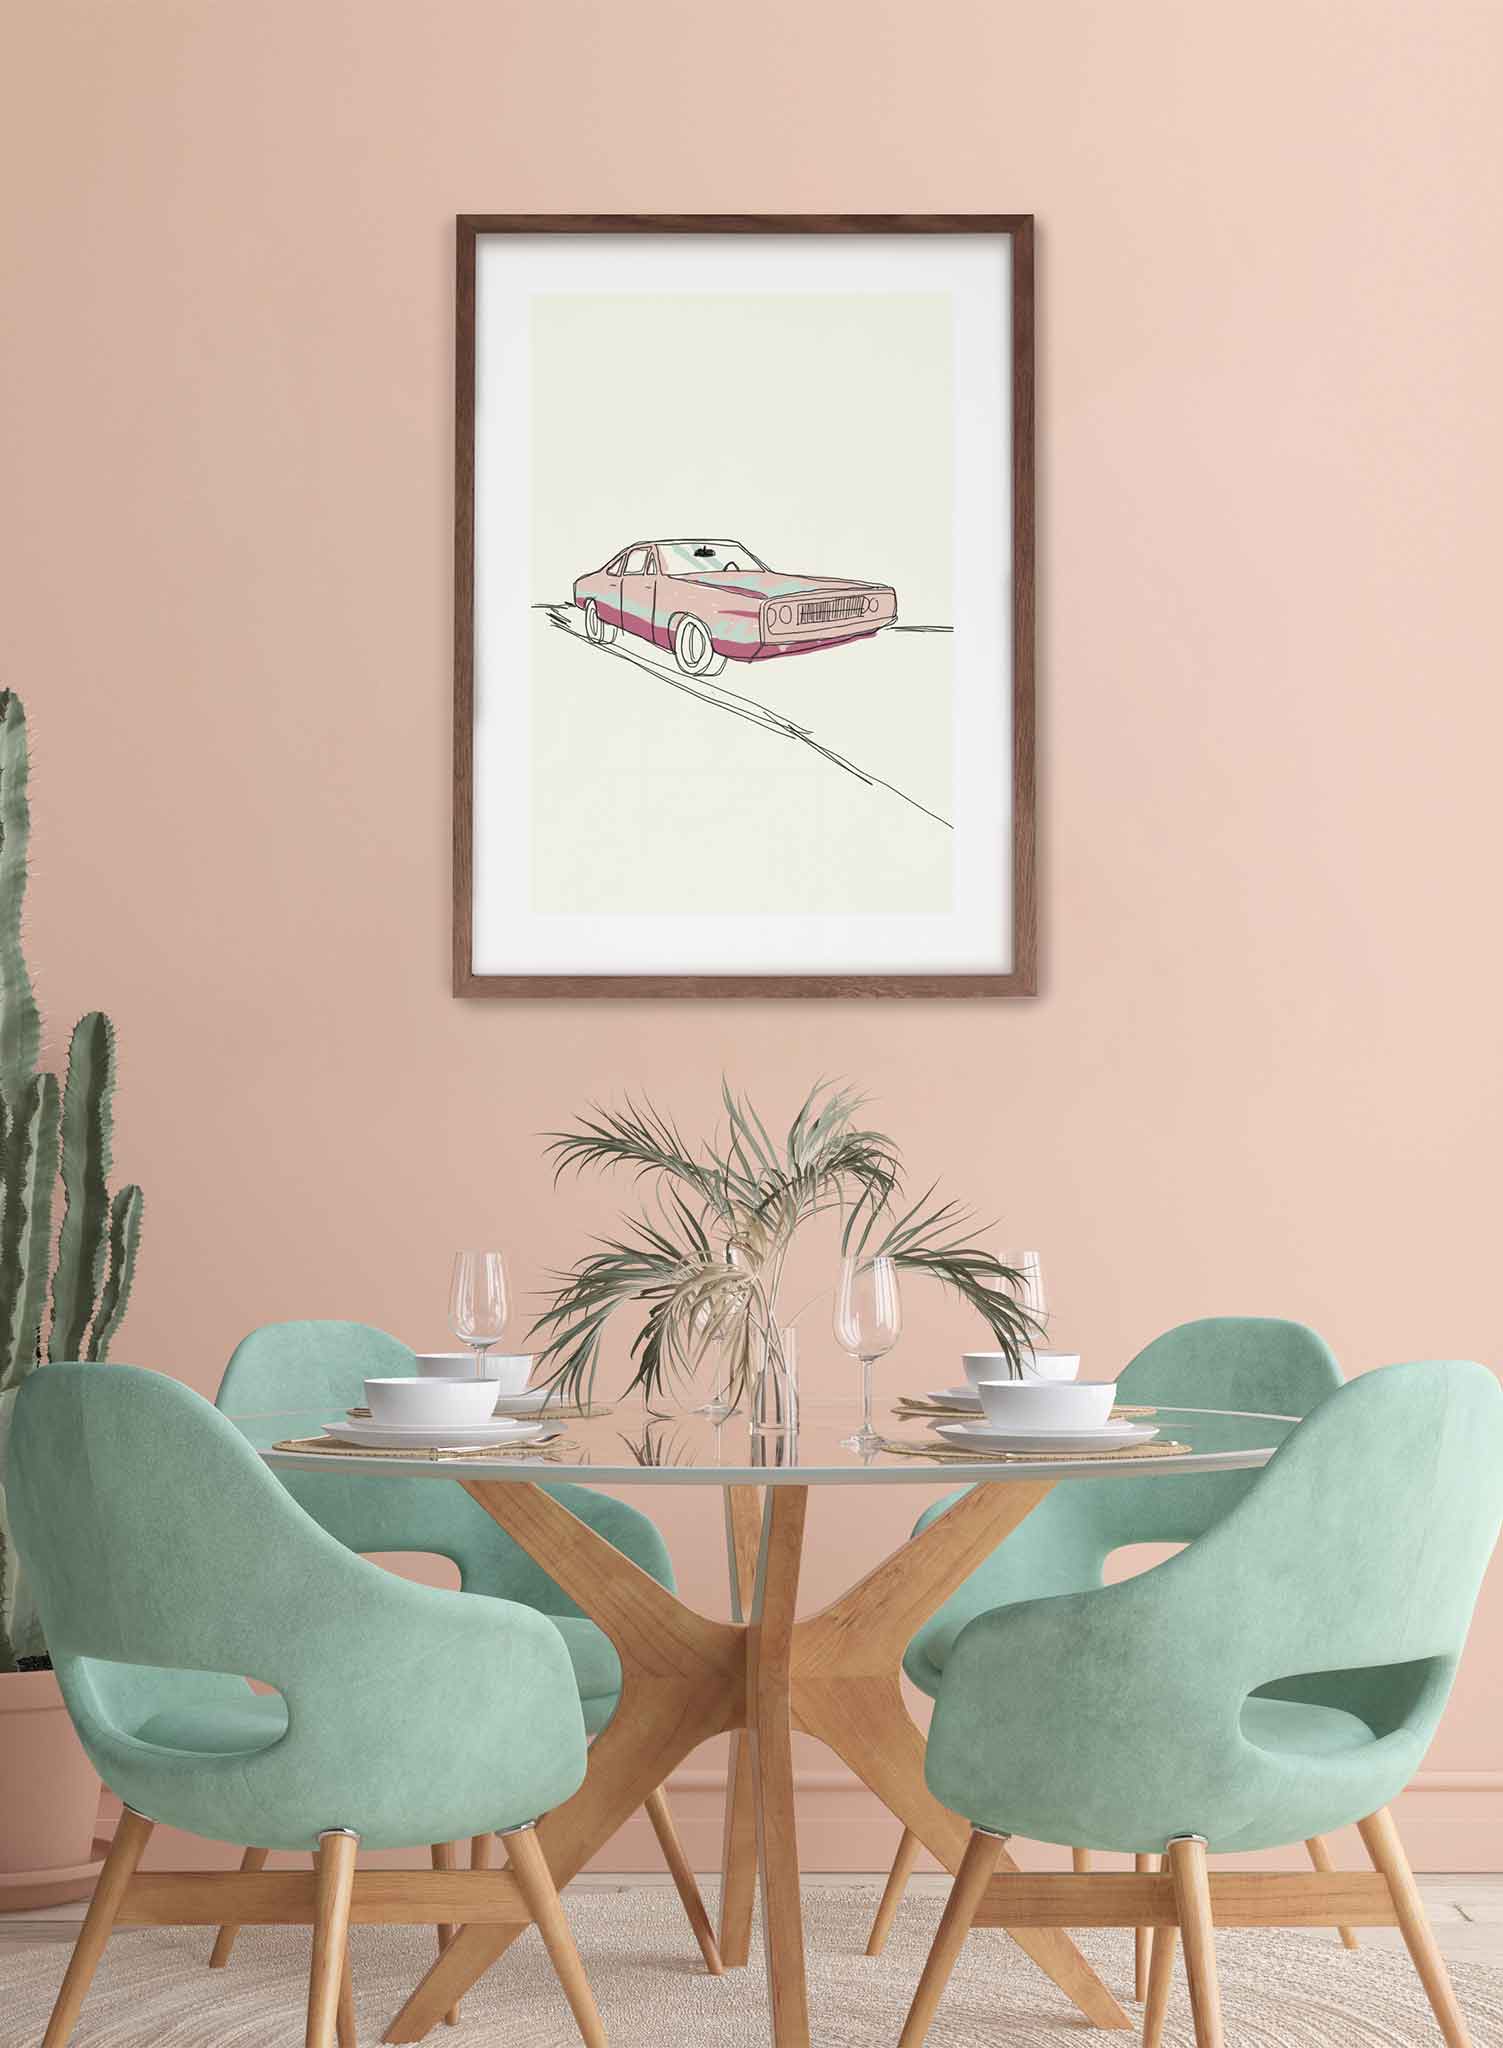 Pedal to the Metal is a minimalist sketch illustration poster of a pink '80s car by Opposite Wall.